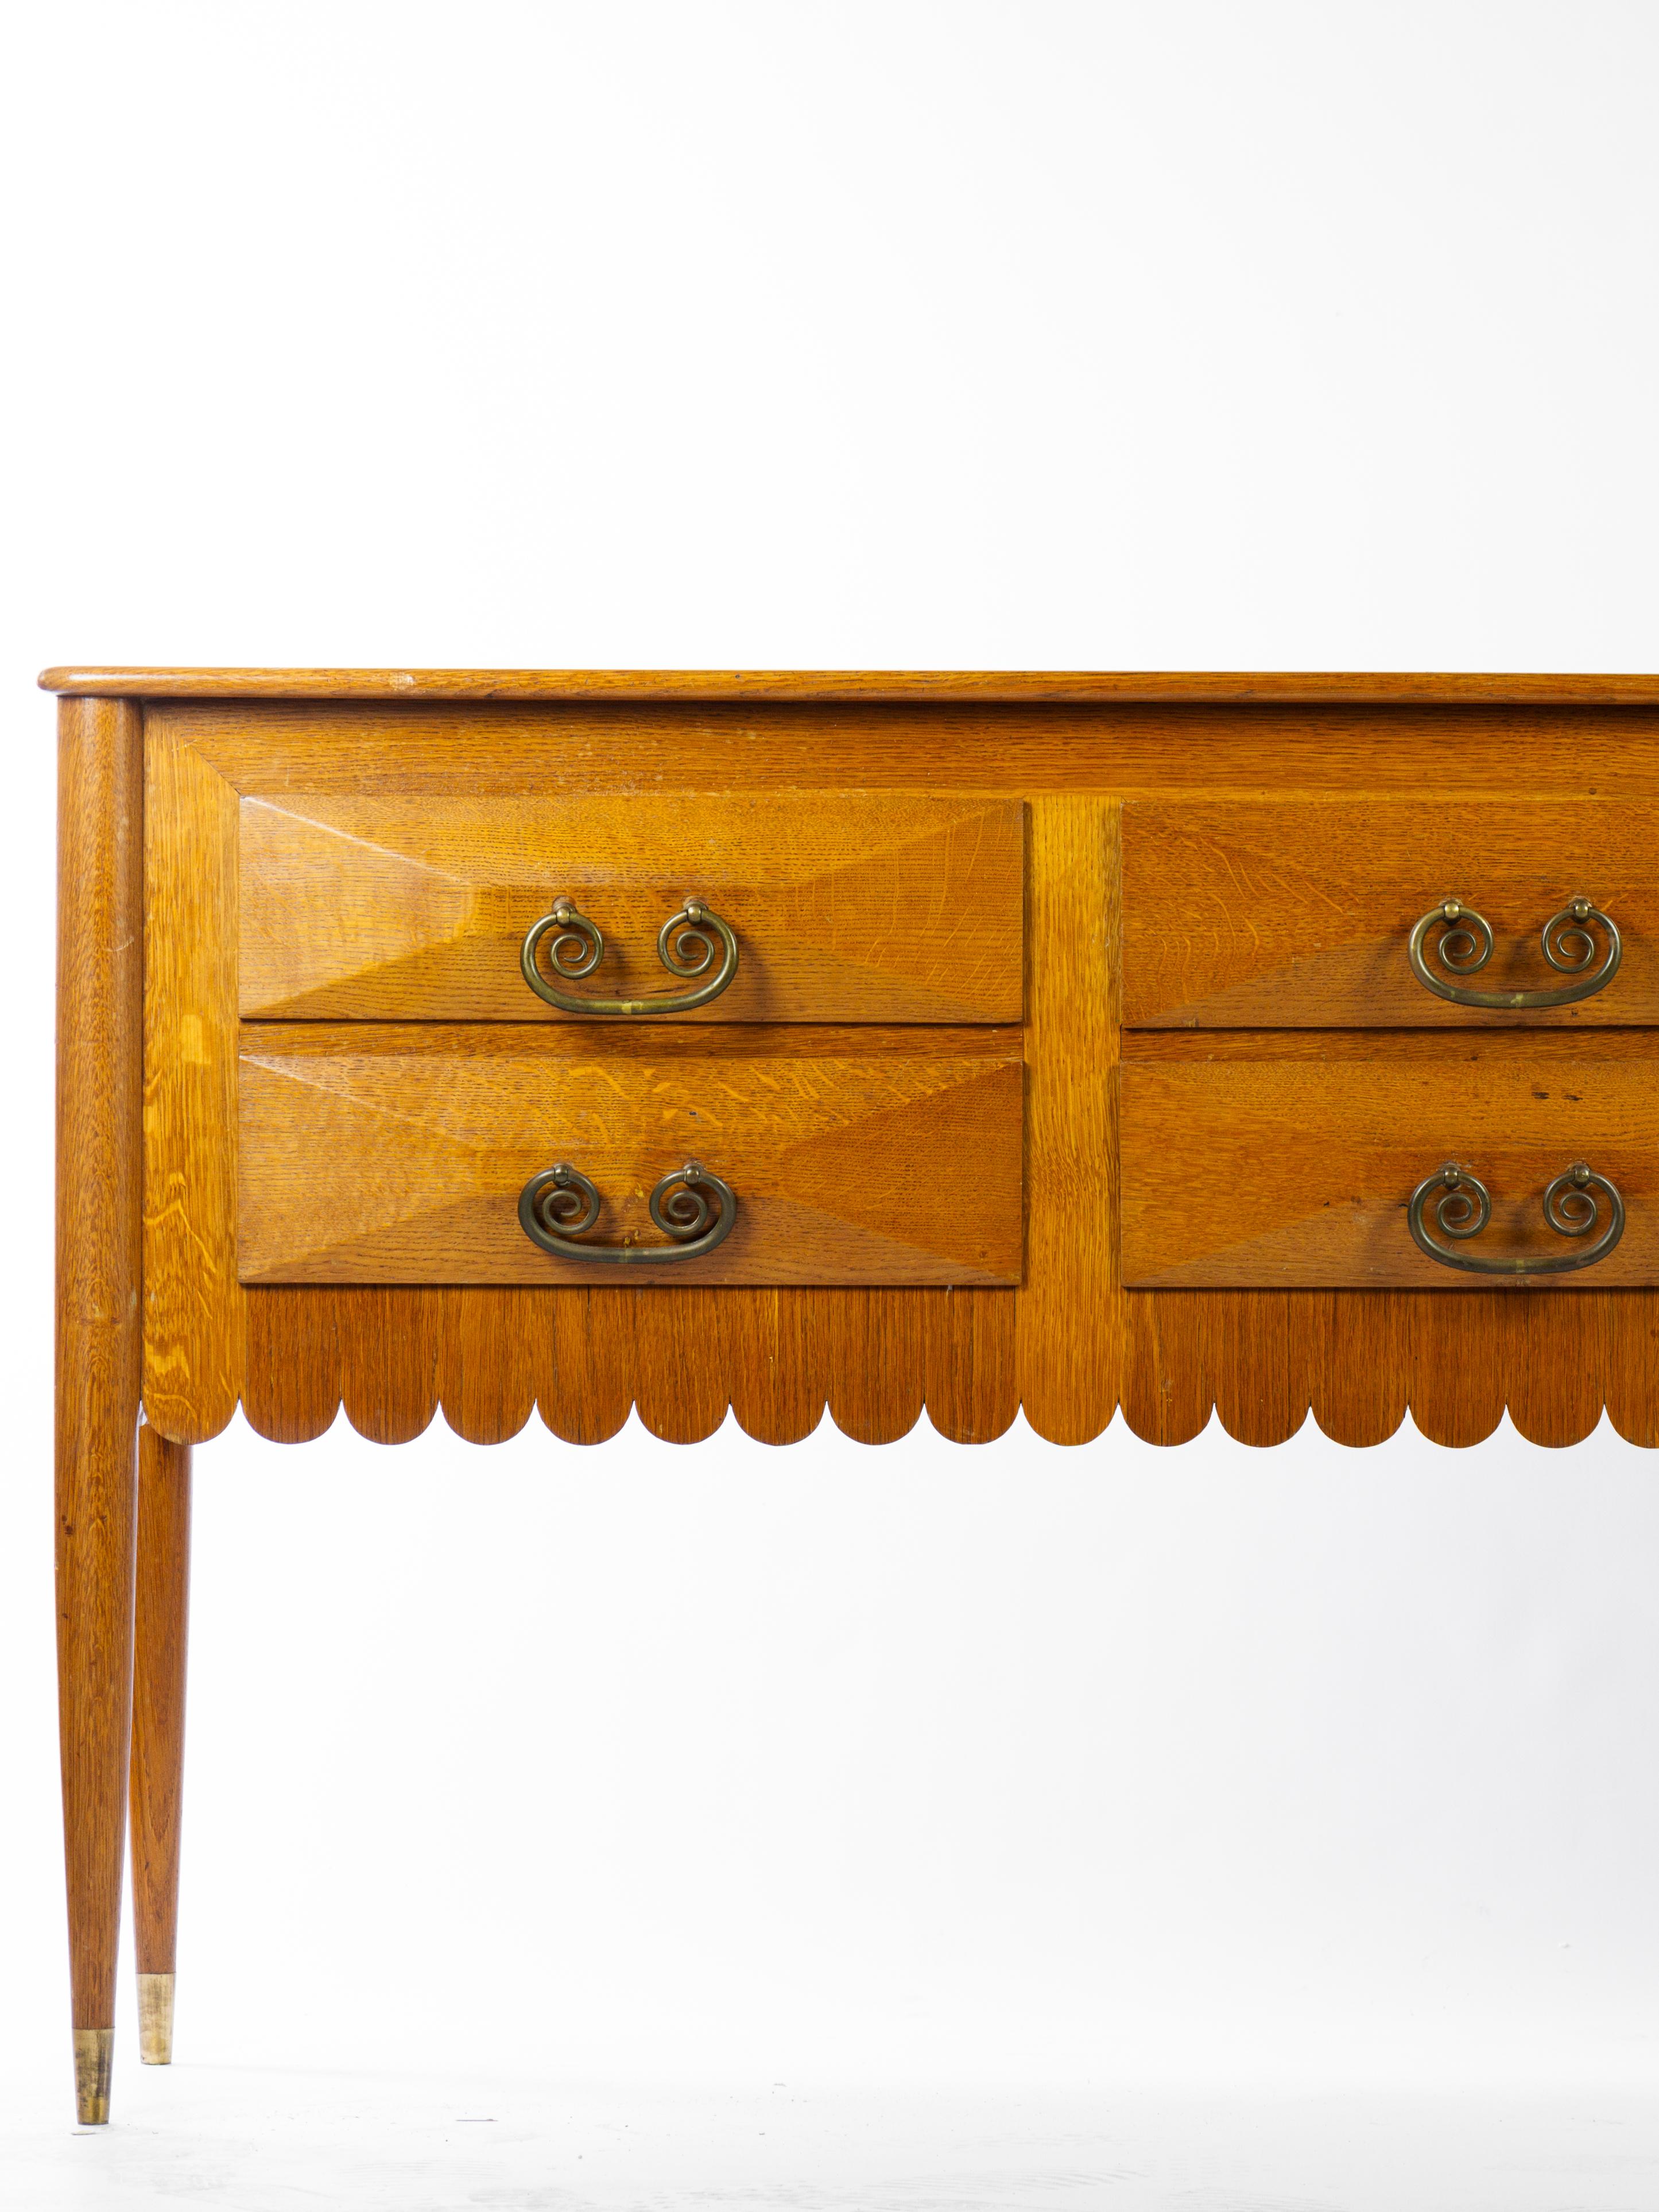 Important 6 drawers commode designed by Paolo Buffa. 

Golden oakwood, bronze handles, brass feet. 

Italian work circa 1950

Hight feet and rounded notch under the deck. 

More information on request. 